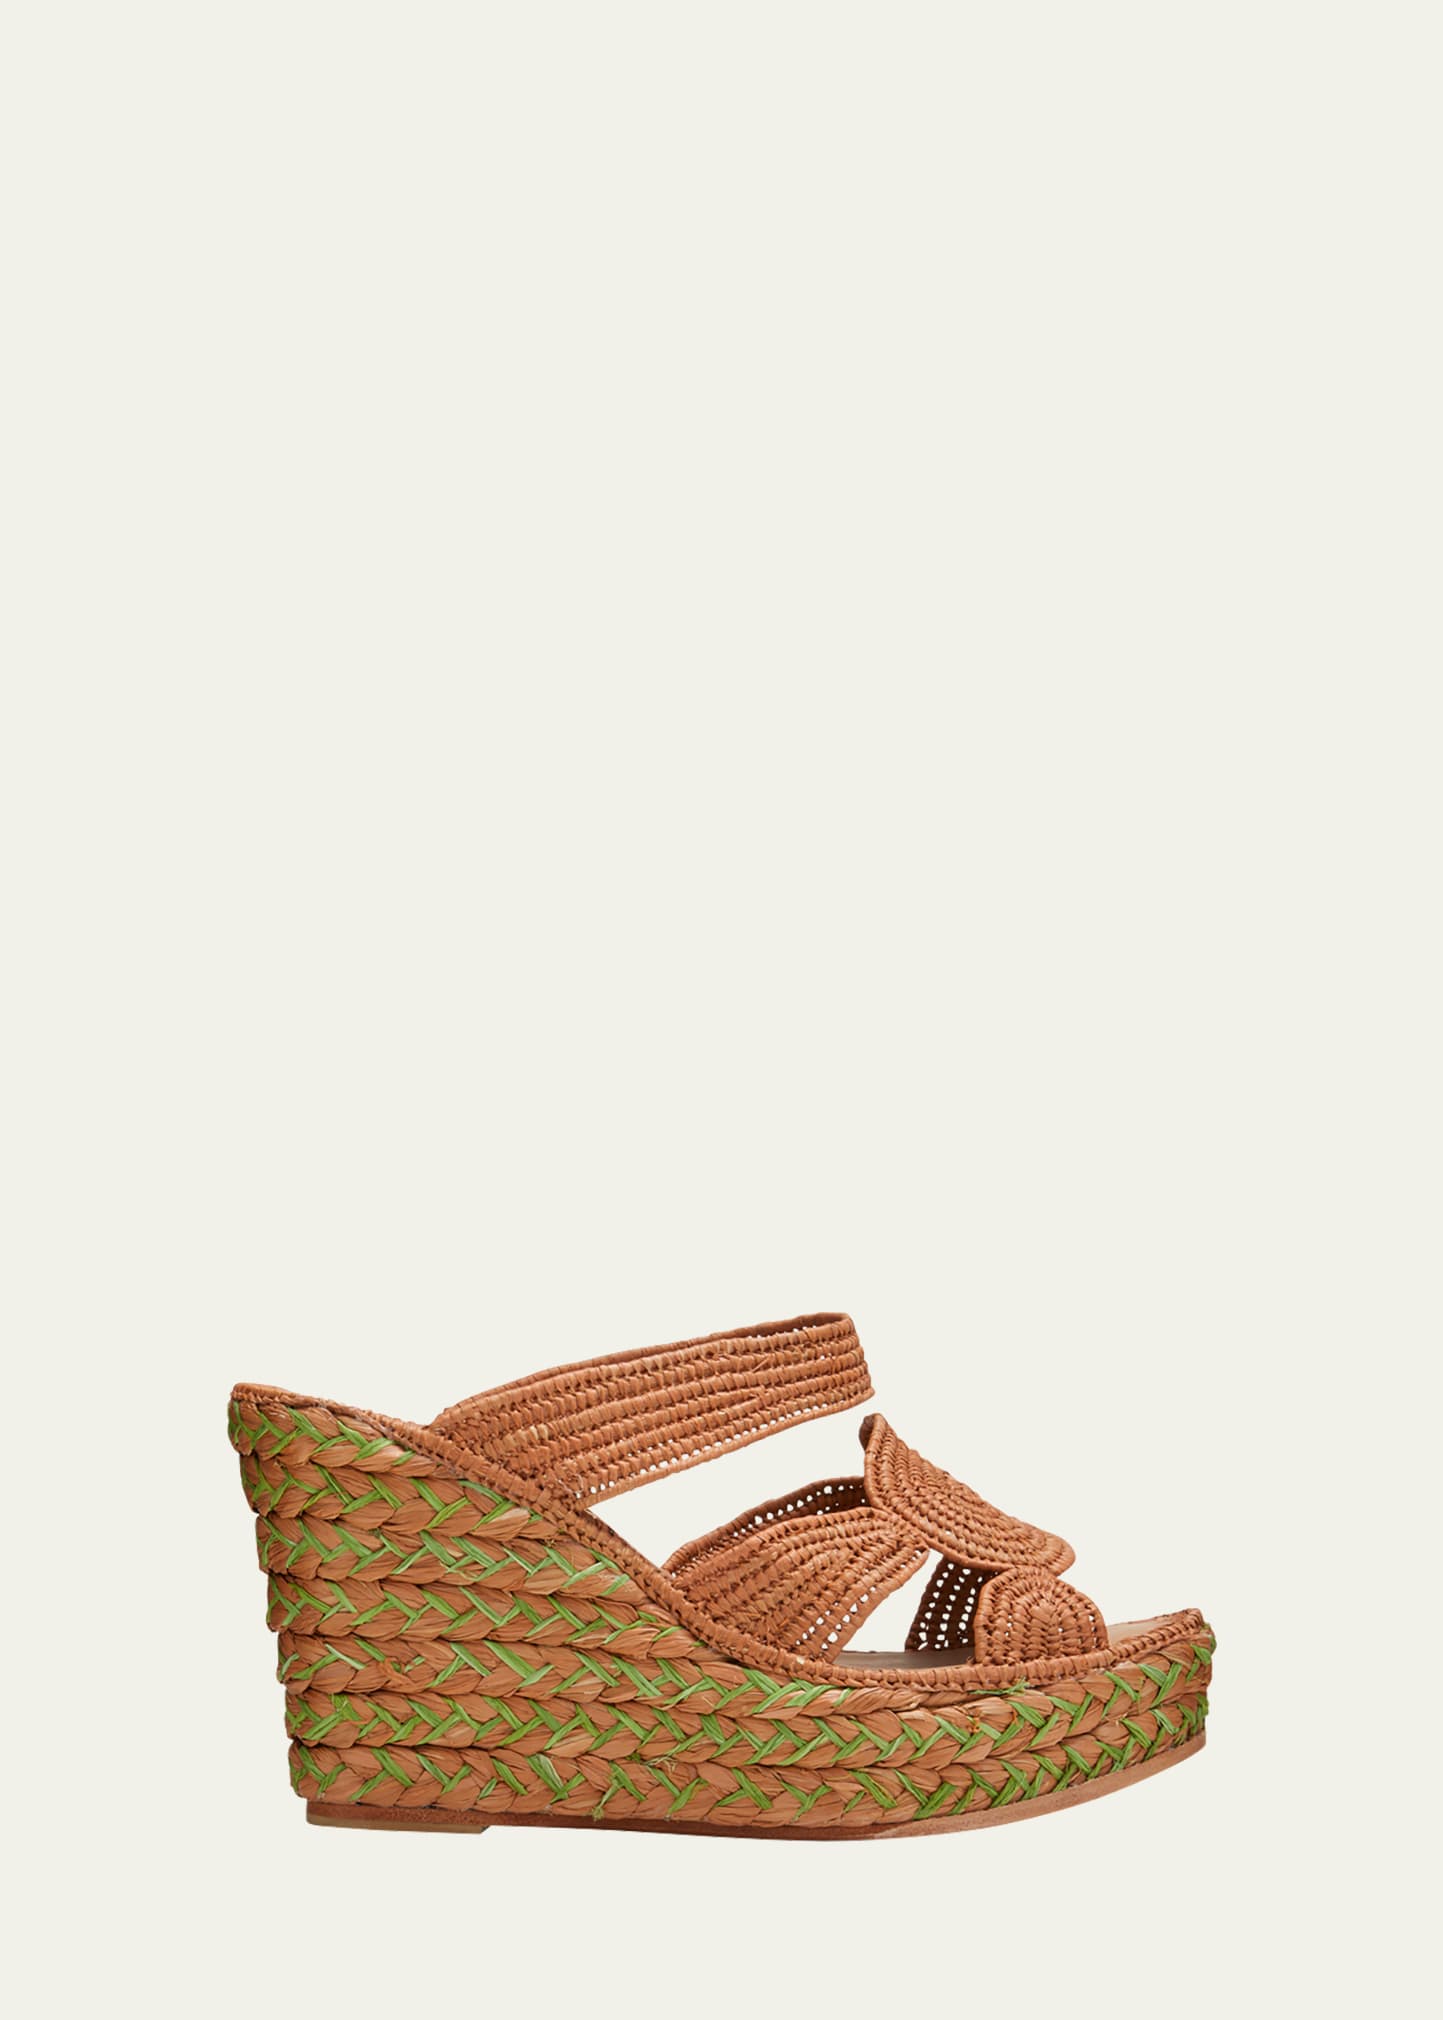 Carrie Forbes Cello Raffia Wedge Sandals